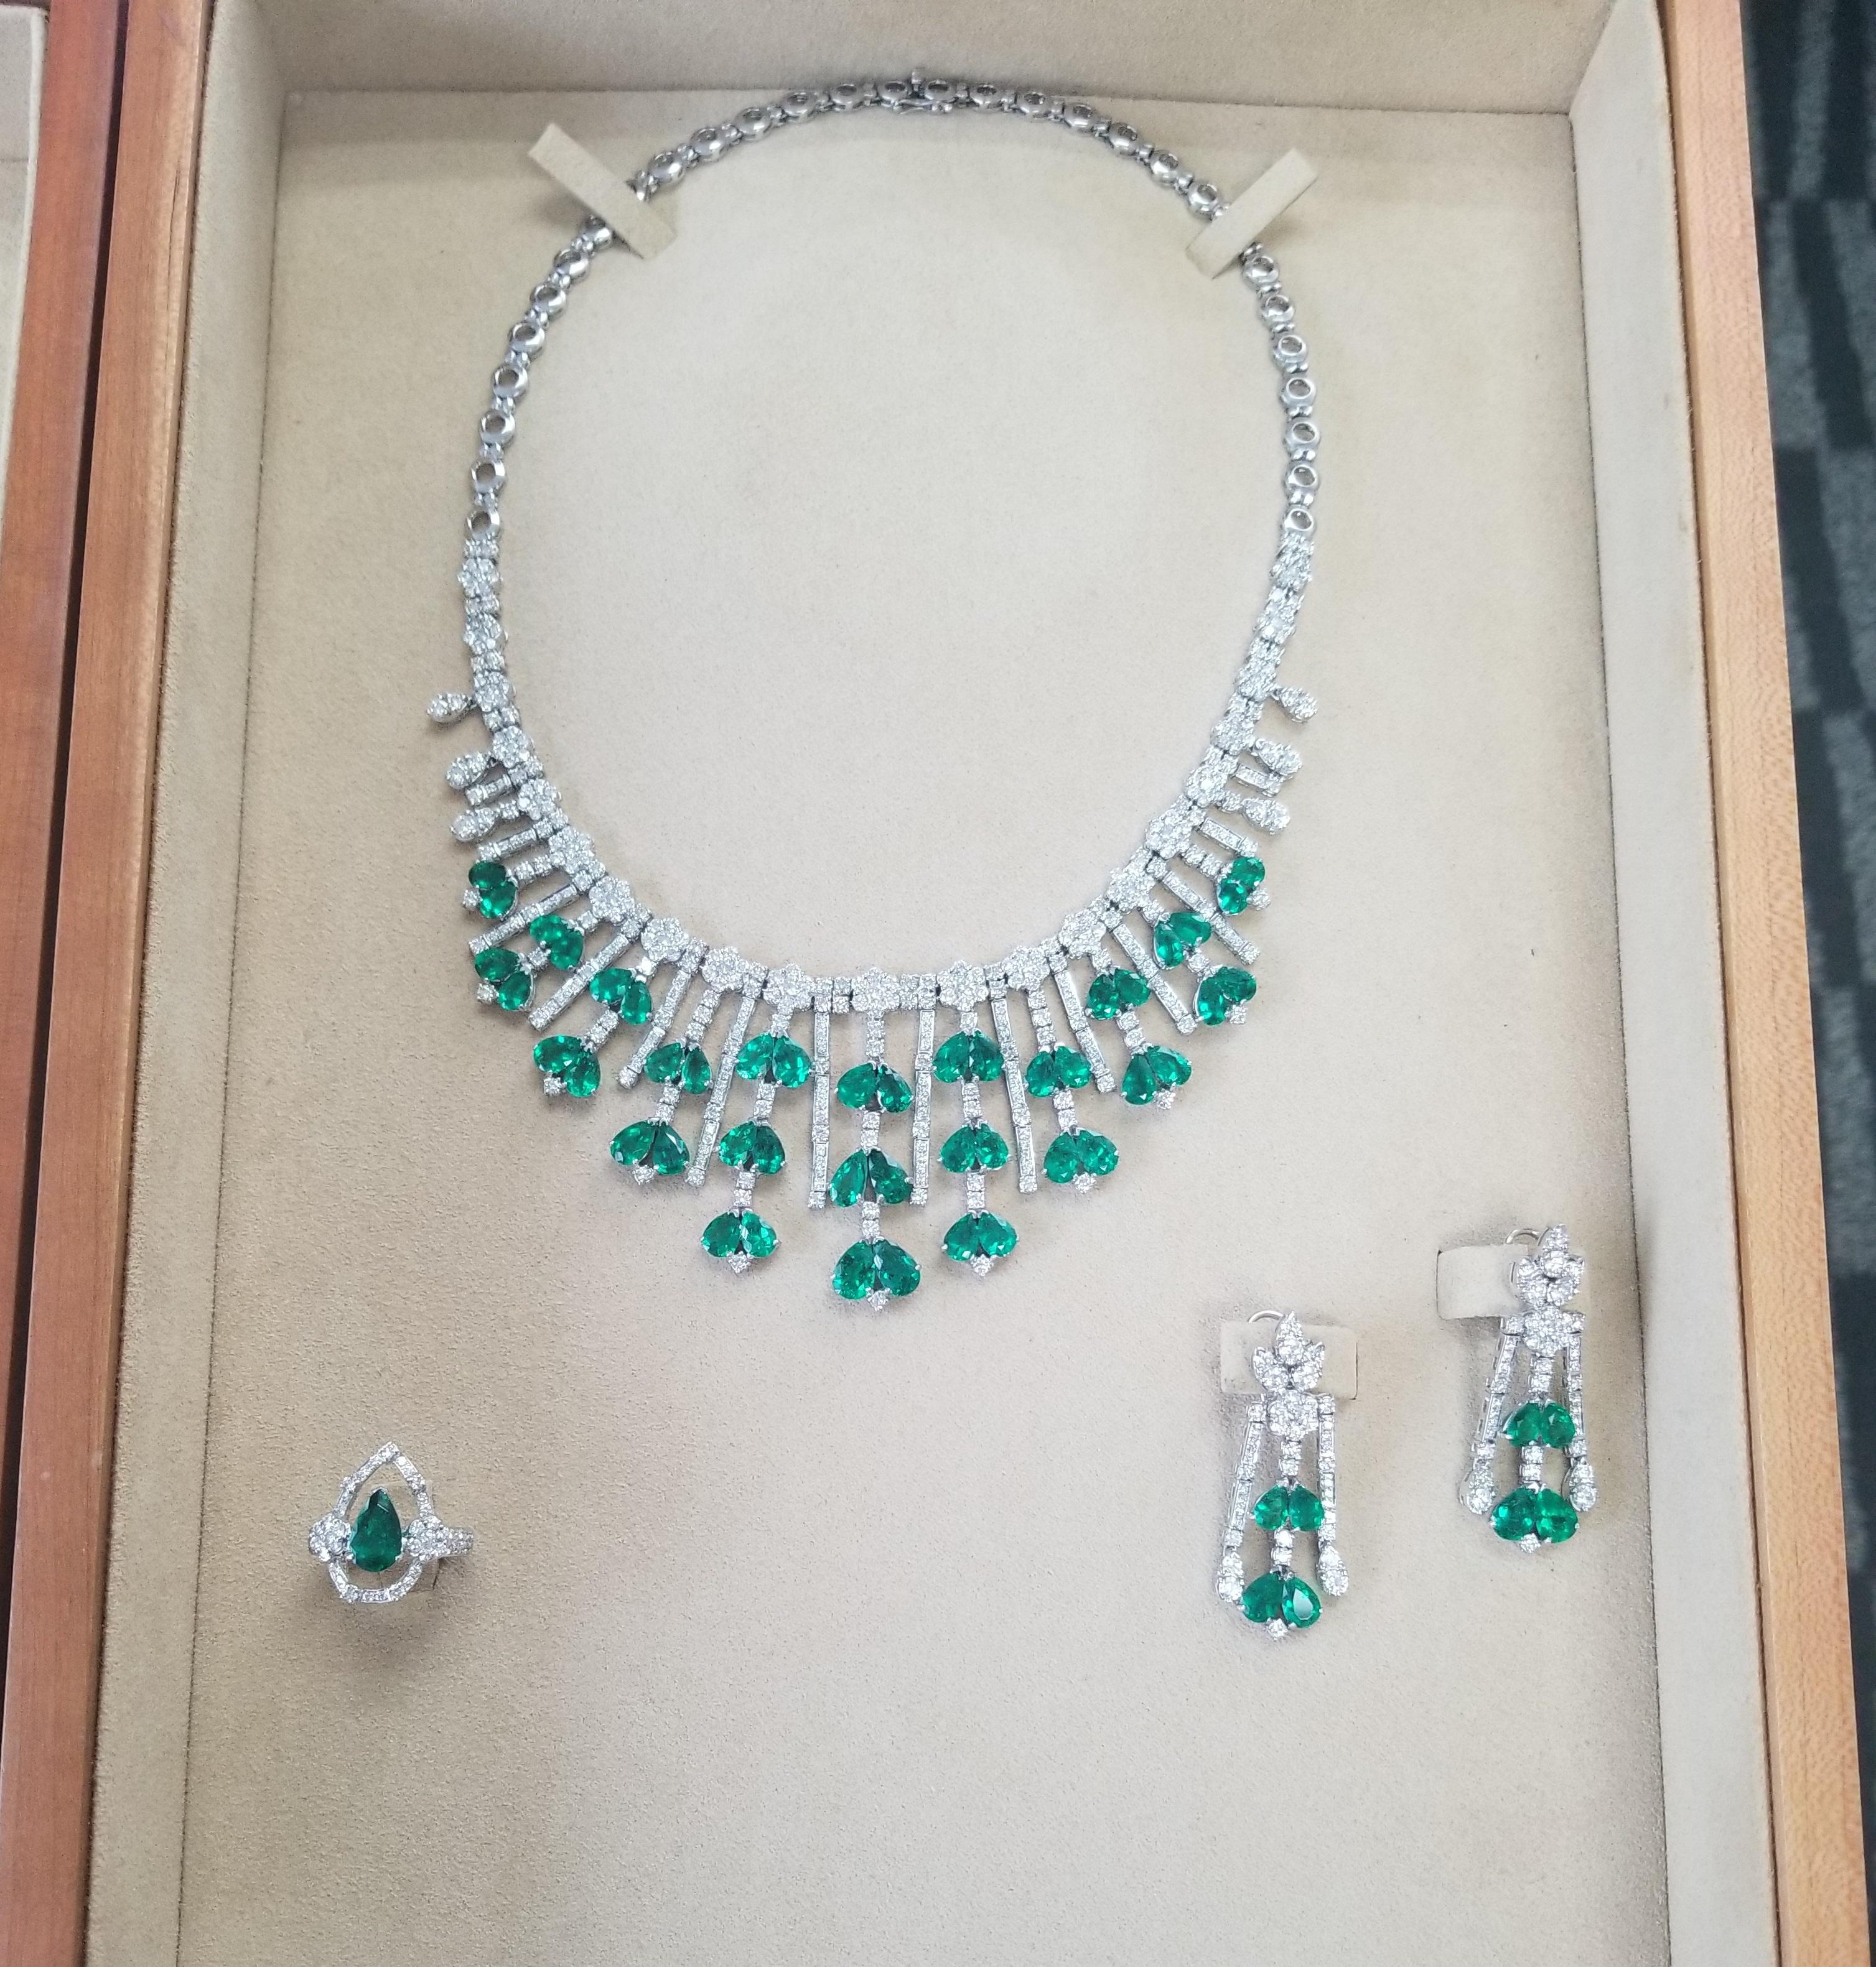 Natural Colombian Pear Shape Emerald and Diamond Set. Certified Set includes a matching Necklace with 46 pieces of emeralds, a pair of ear pendants with 8 pieces of emeralds., and 1 Piece of emerald Ring.

Emeralds Details: Approximately 32.93 total